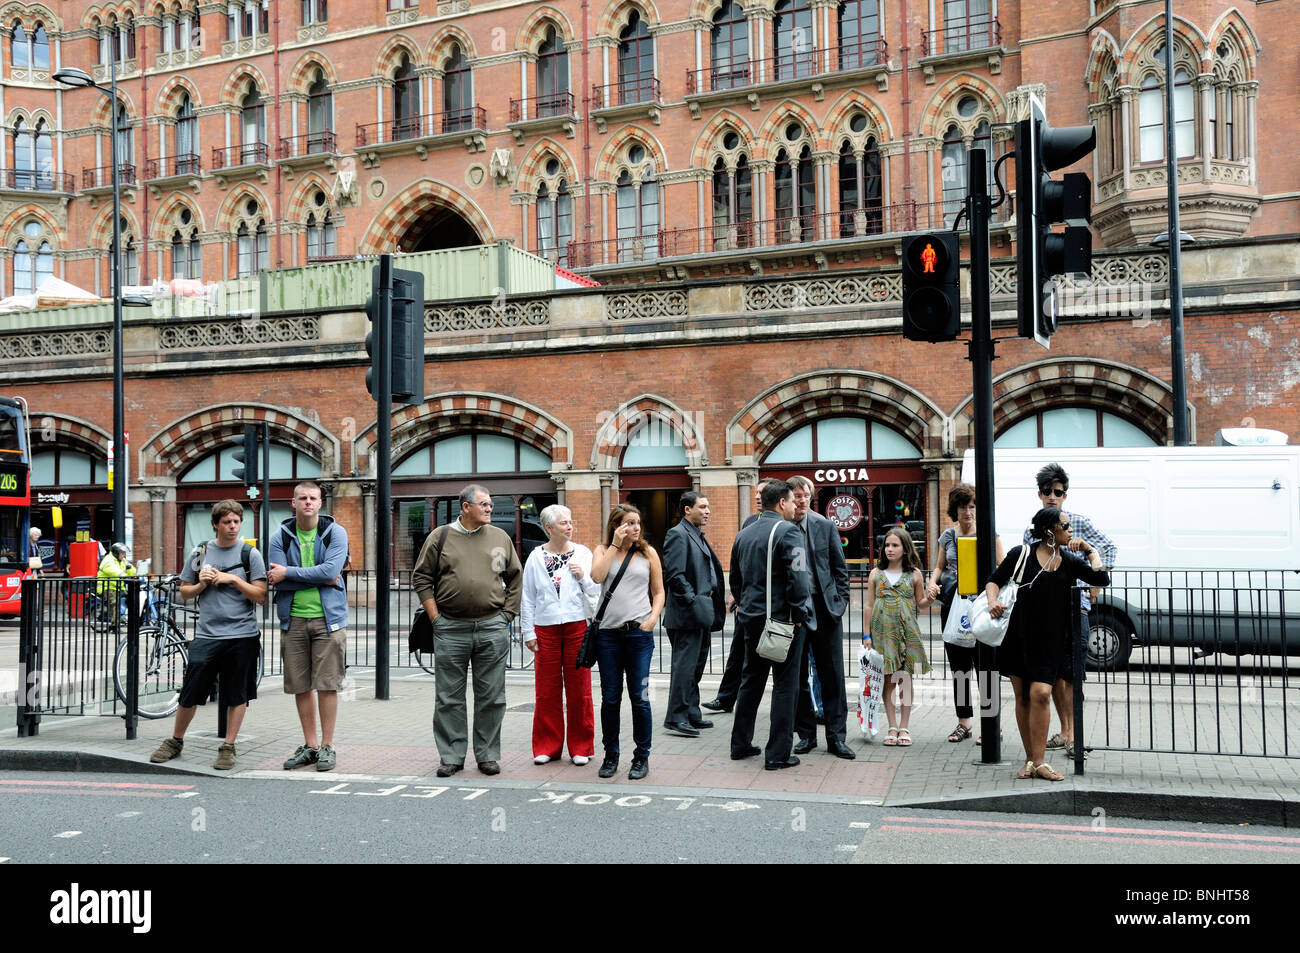 Pedestrians crossing Euston Road in front of St. Pancras Station, London, England UK Stock Photo